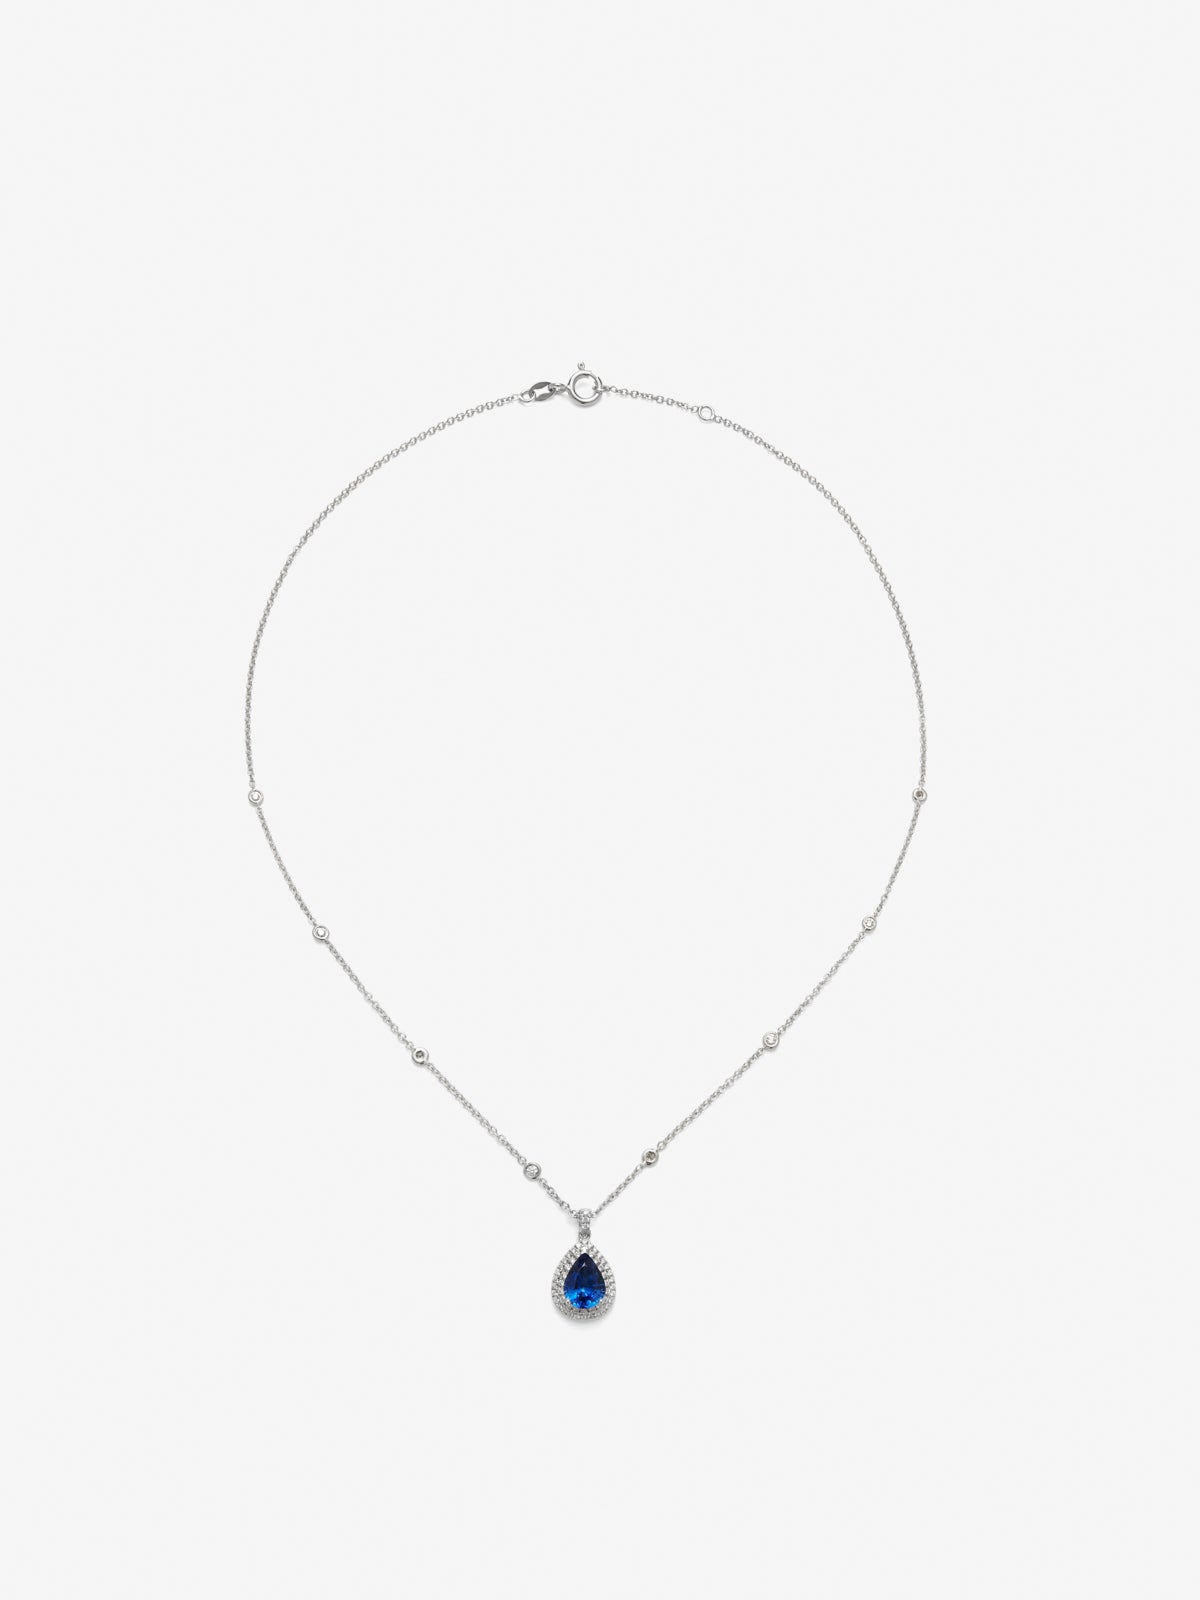 18K white gold pendant with pear-cut royal blue sapphire of 1.93 cts and 62 brilliant-cut diamonds with a total of 0.44 cts